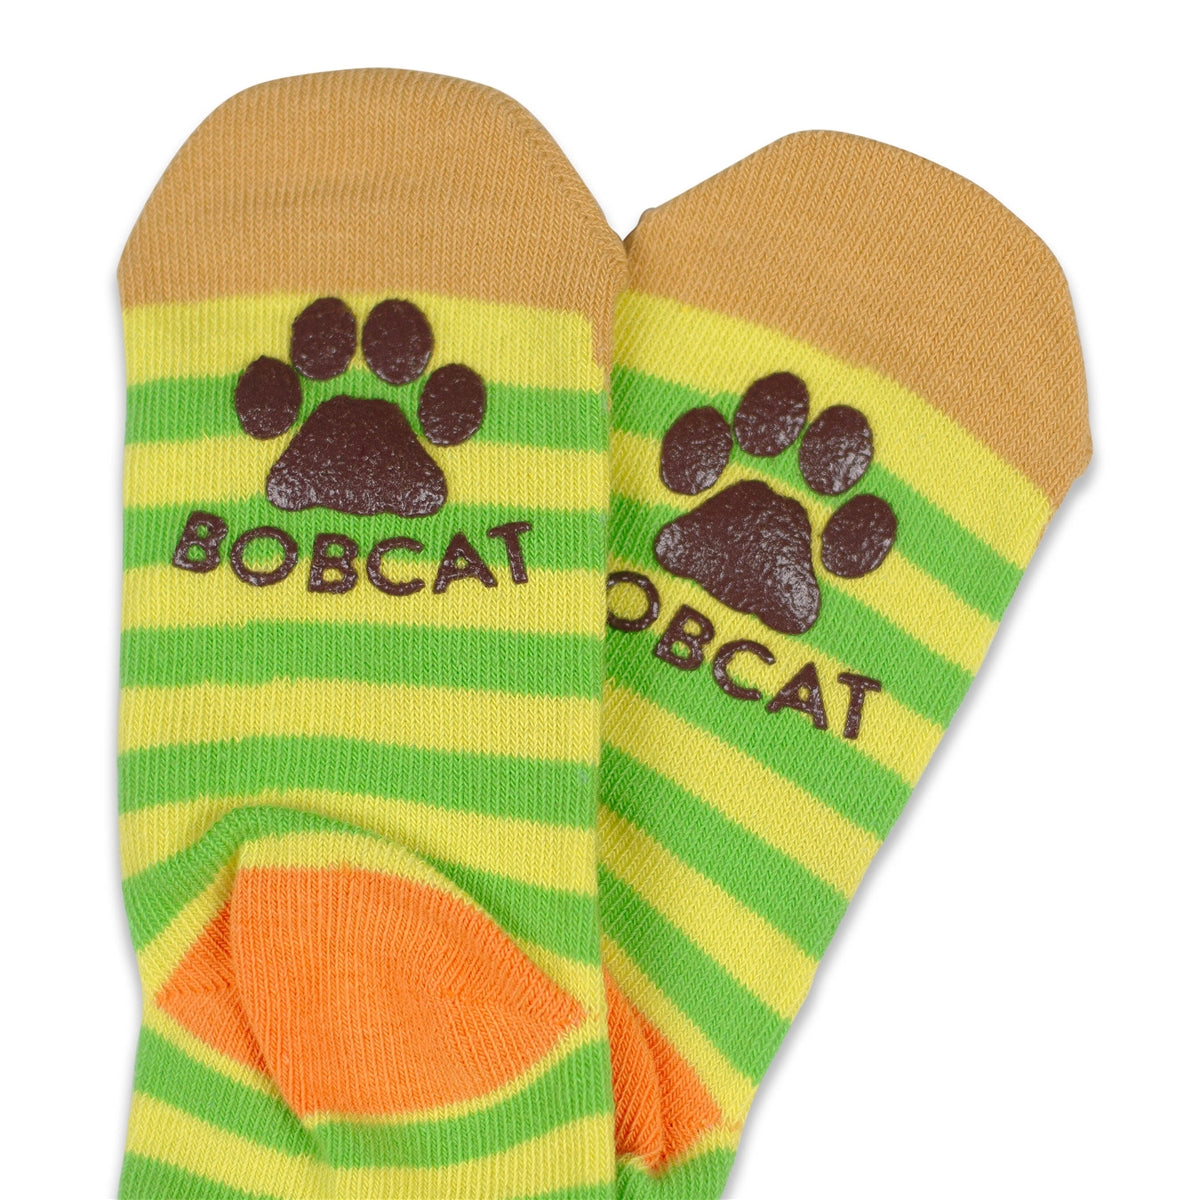 Multicolor striped yellow-green San Francisco Critter kids socks, with bobcat design and non-skid "tracks" feature on sole.